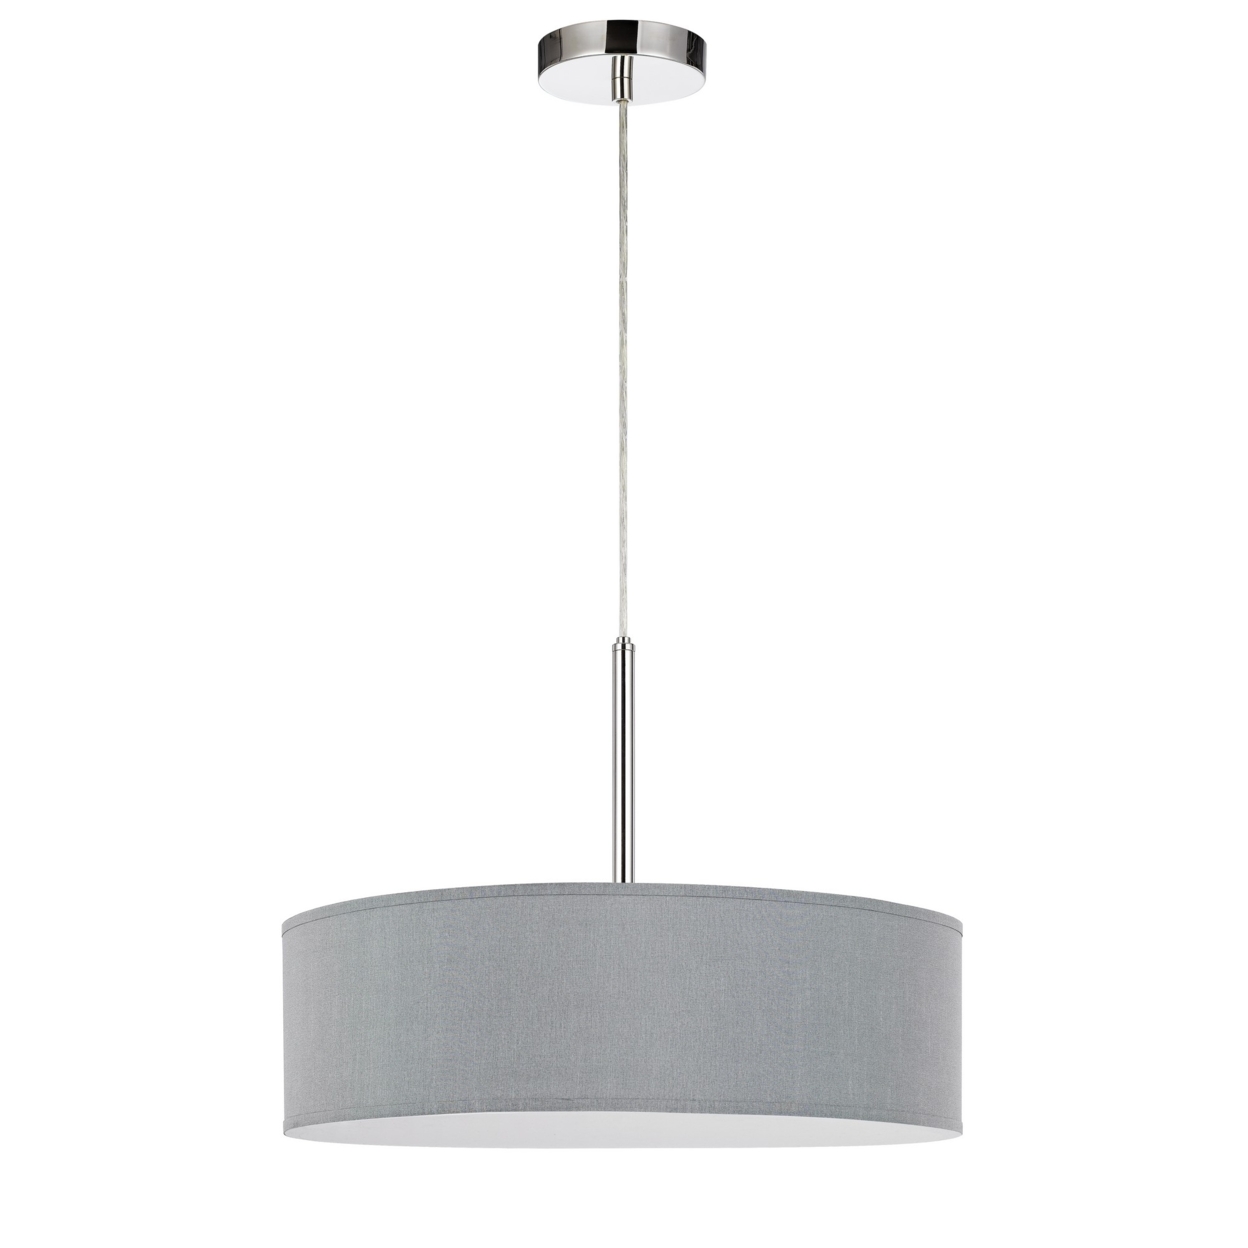 Integrated LED Dimmable Pendant Lighting With Fabric Drum Shade, Gray- Saltoro Sherpi